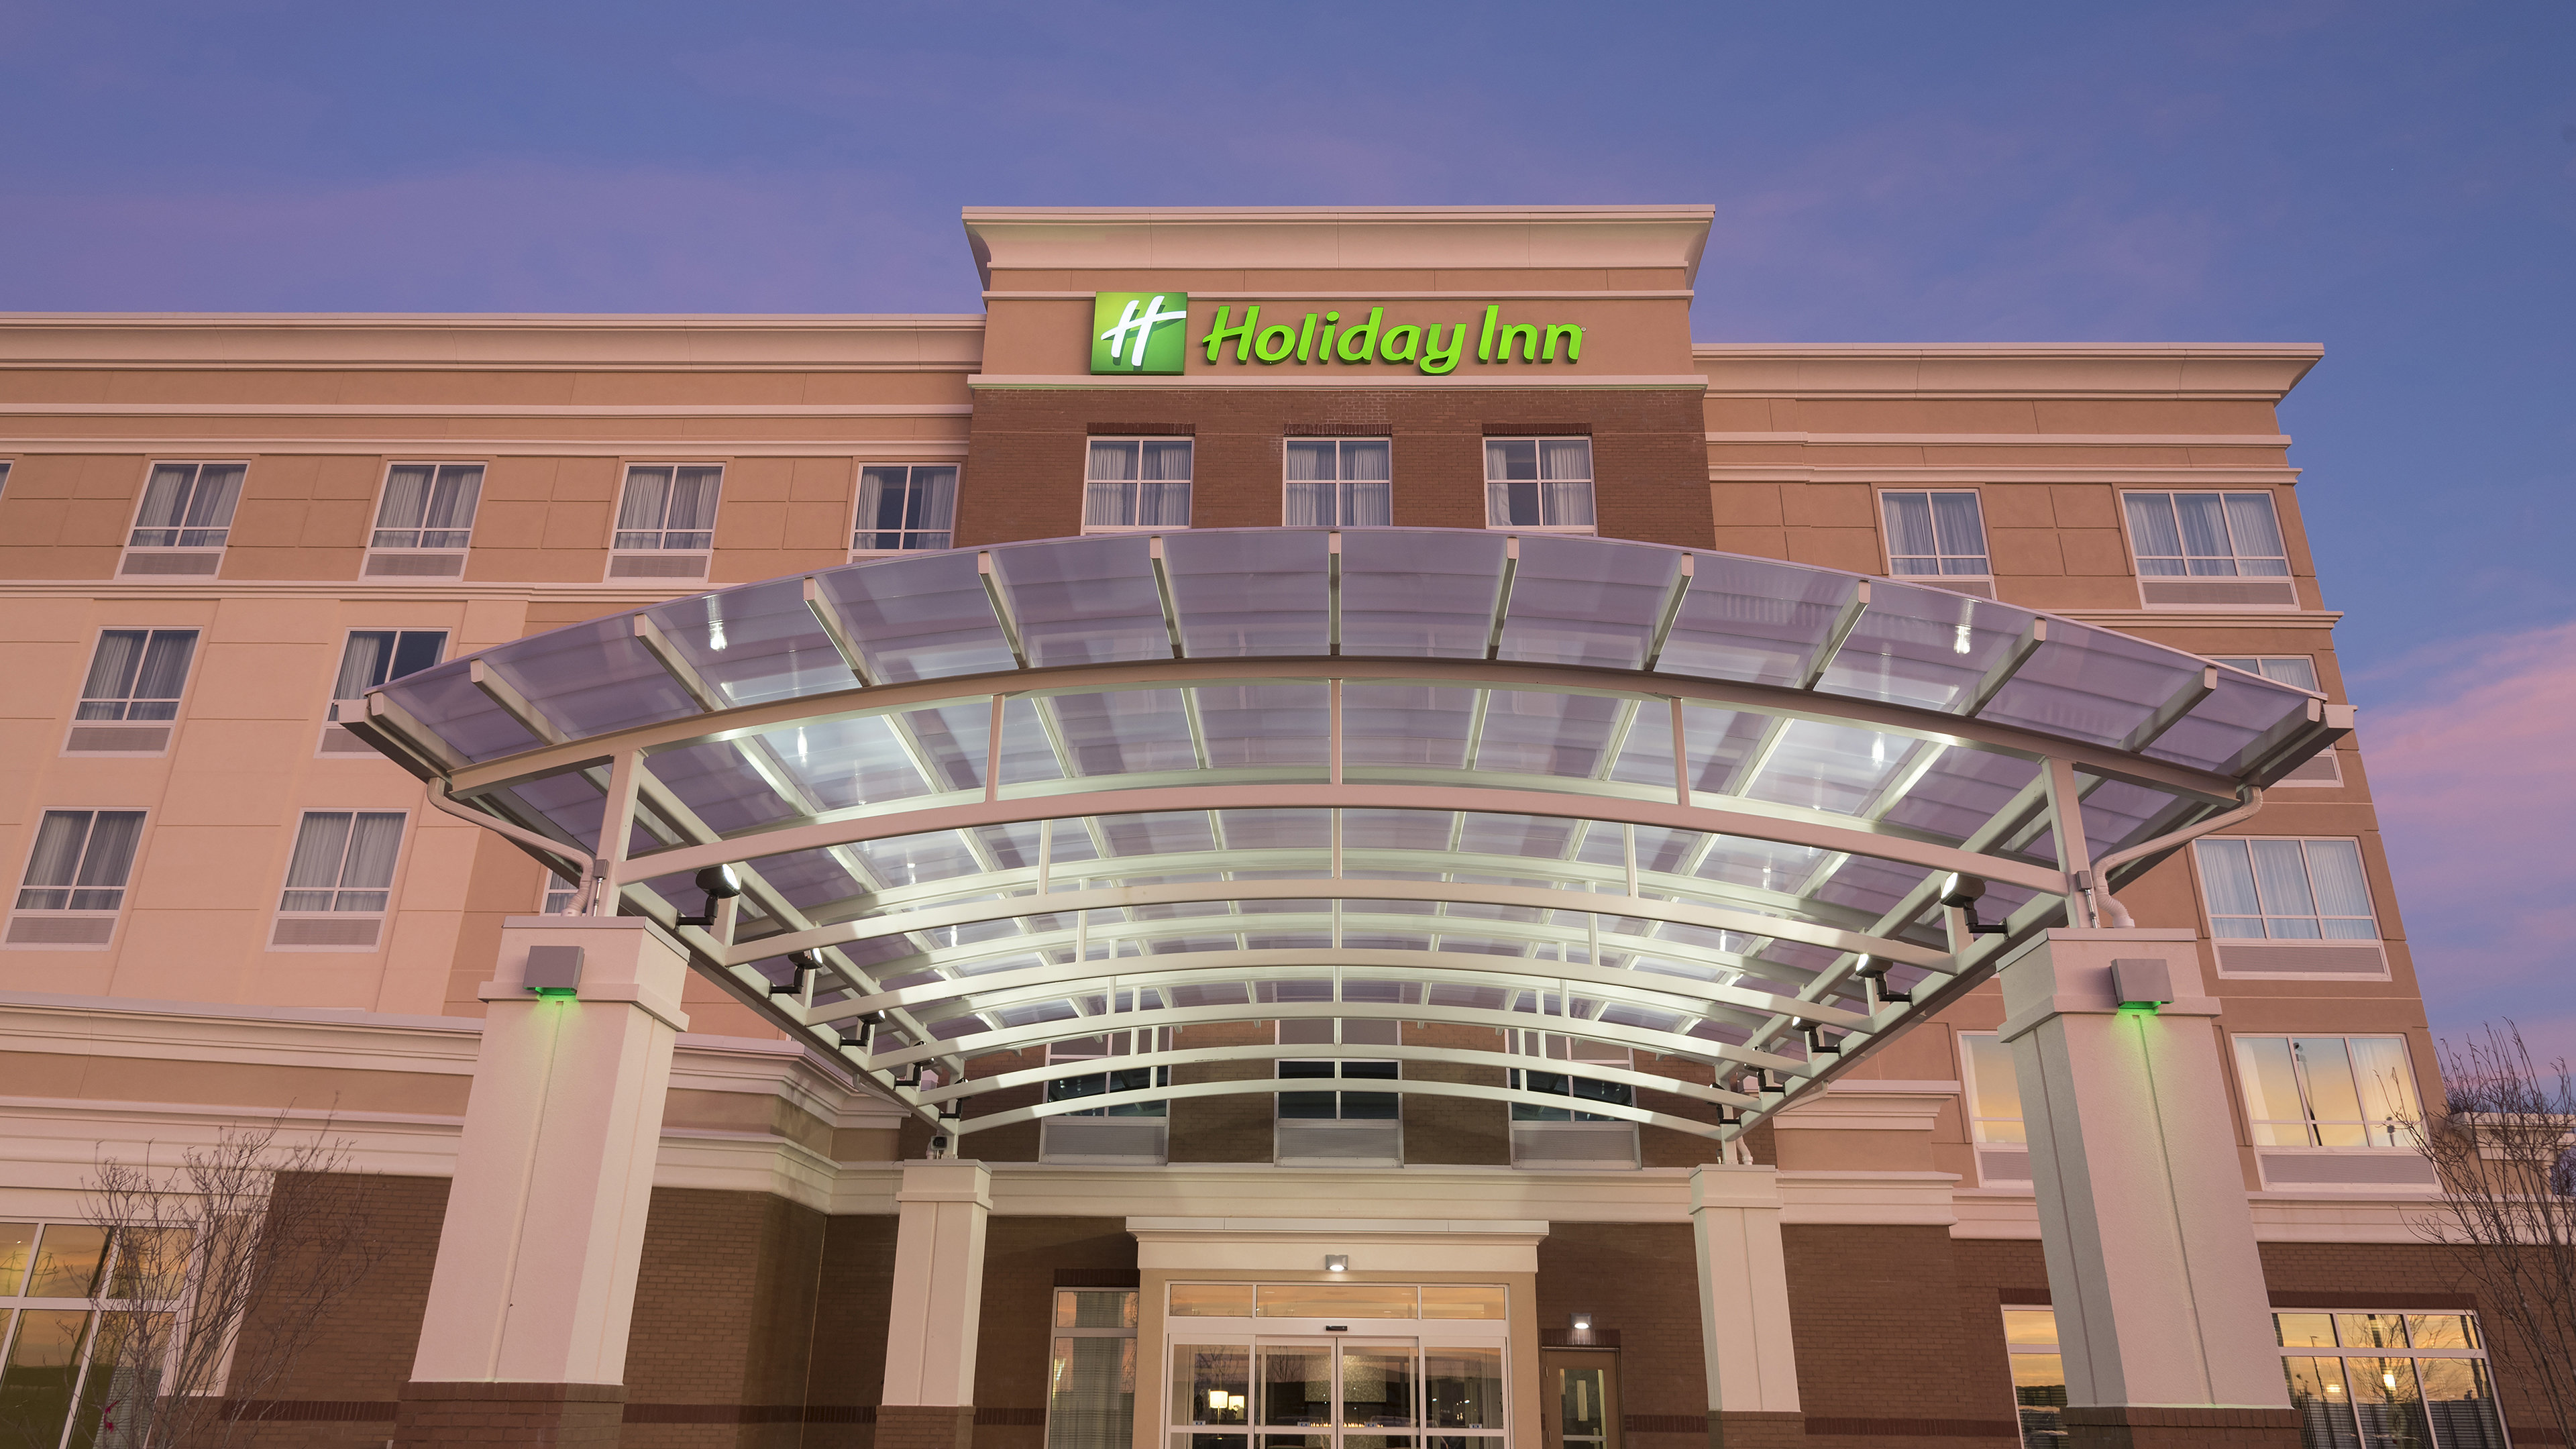 Welcome to the Award Winning Holiday Inn Indianapolis Airport